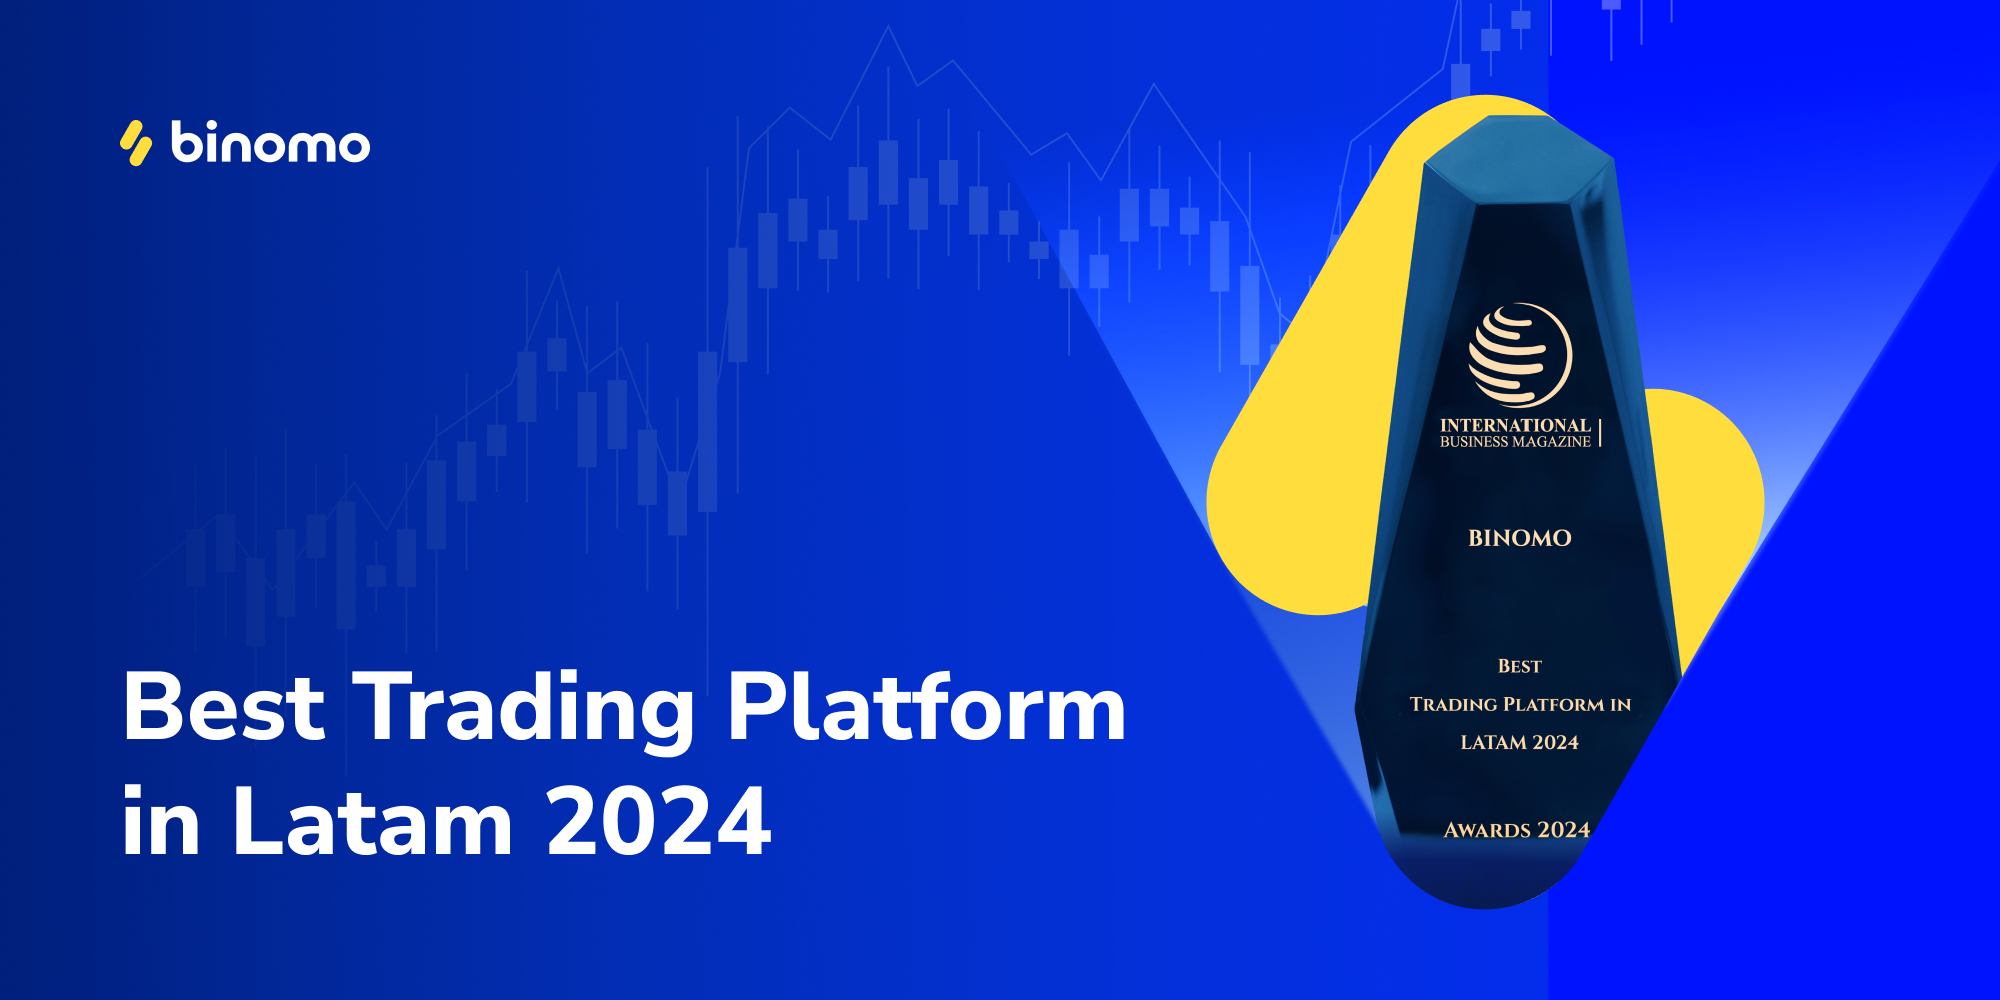 Binomo, a global trading platform, has emerged victorious, claiming the Best Trading Platform in LatAm 2024 title by International Business Magazine